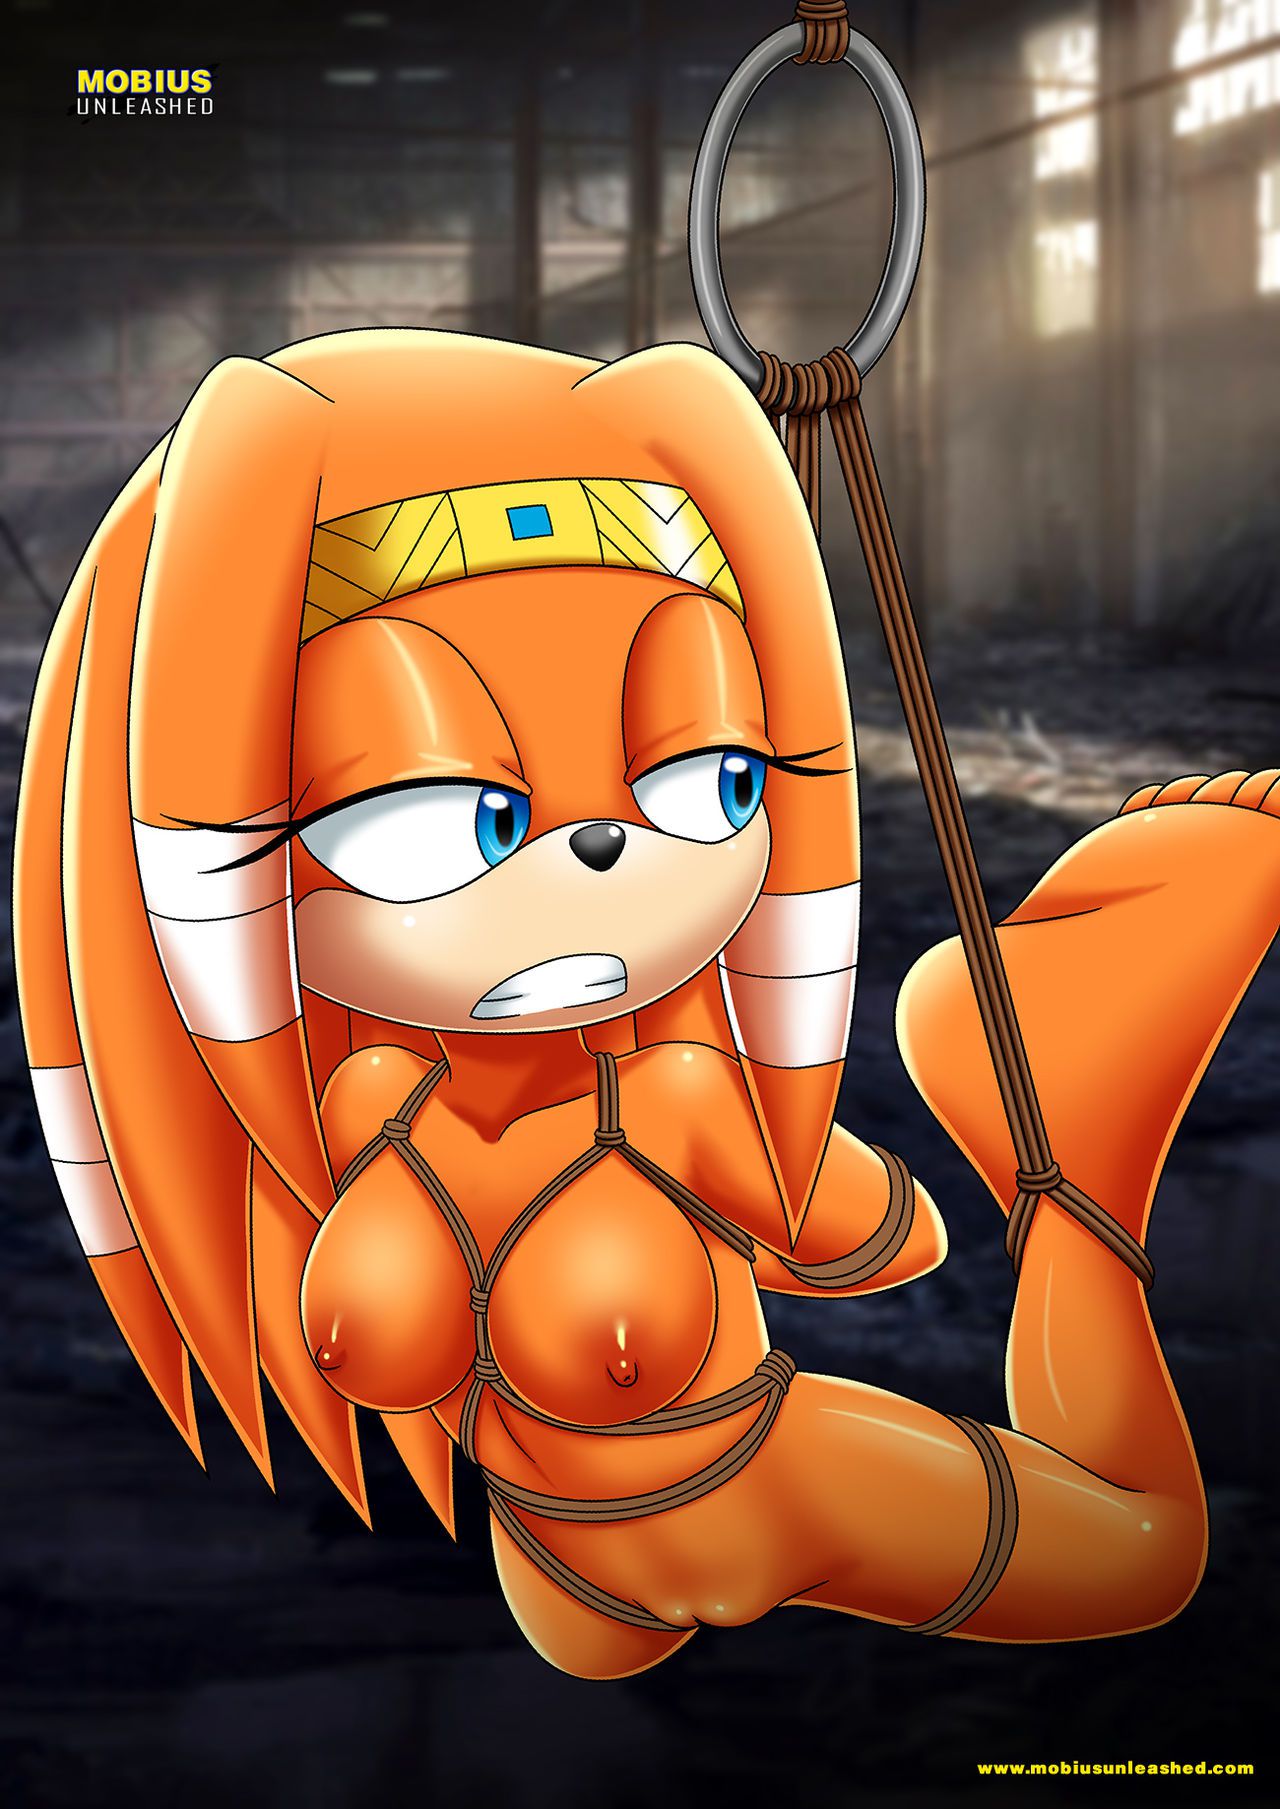 Mobius Unleashed: Tikal the Echidna 85